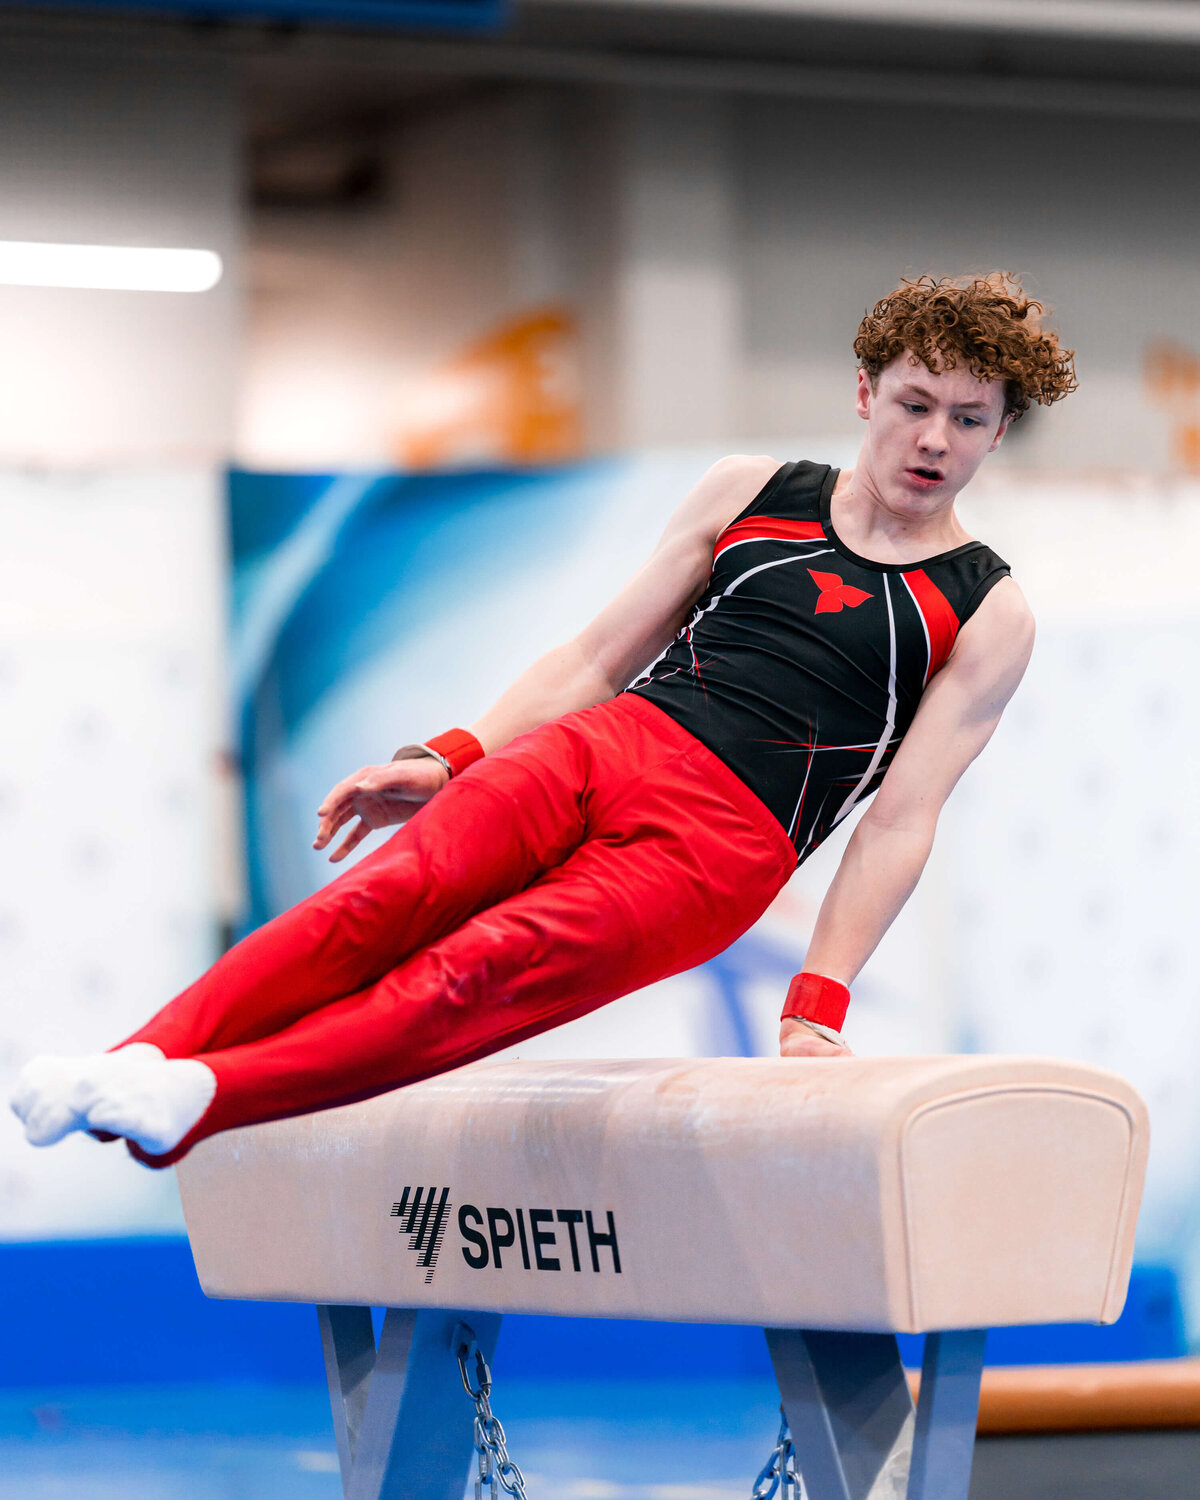 Photo by Luke O'Geil taken at the 2023 inaugural Grizzly Classic men's artistic gymnastics competitionA9_00310